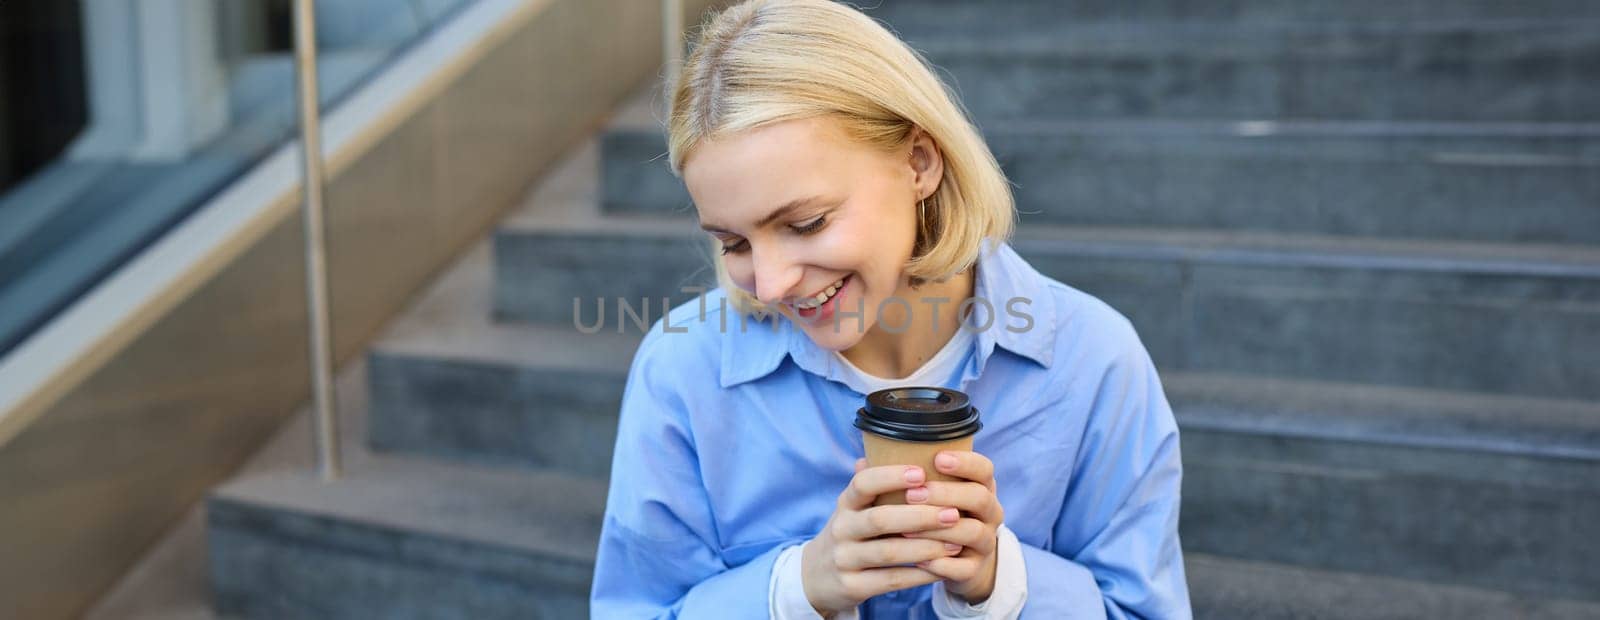 Close up portrait of beautiful, smiling blonde woman, student sitting on stairs outside campus, drinking takeaway coffee, warm-up her hands while holding a cup.